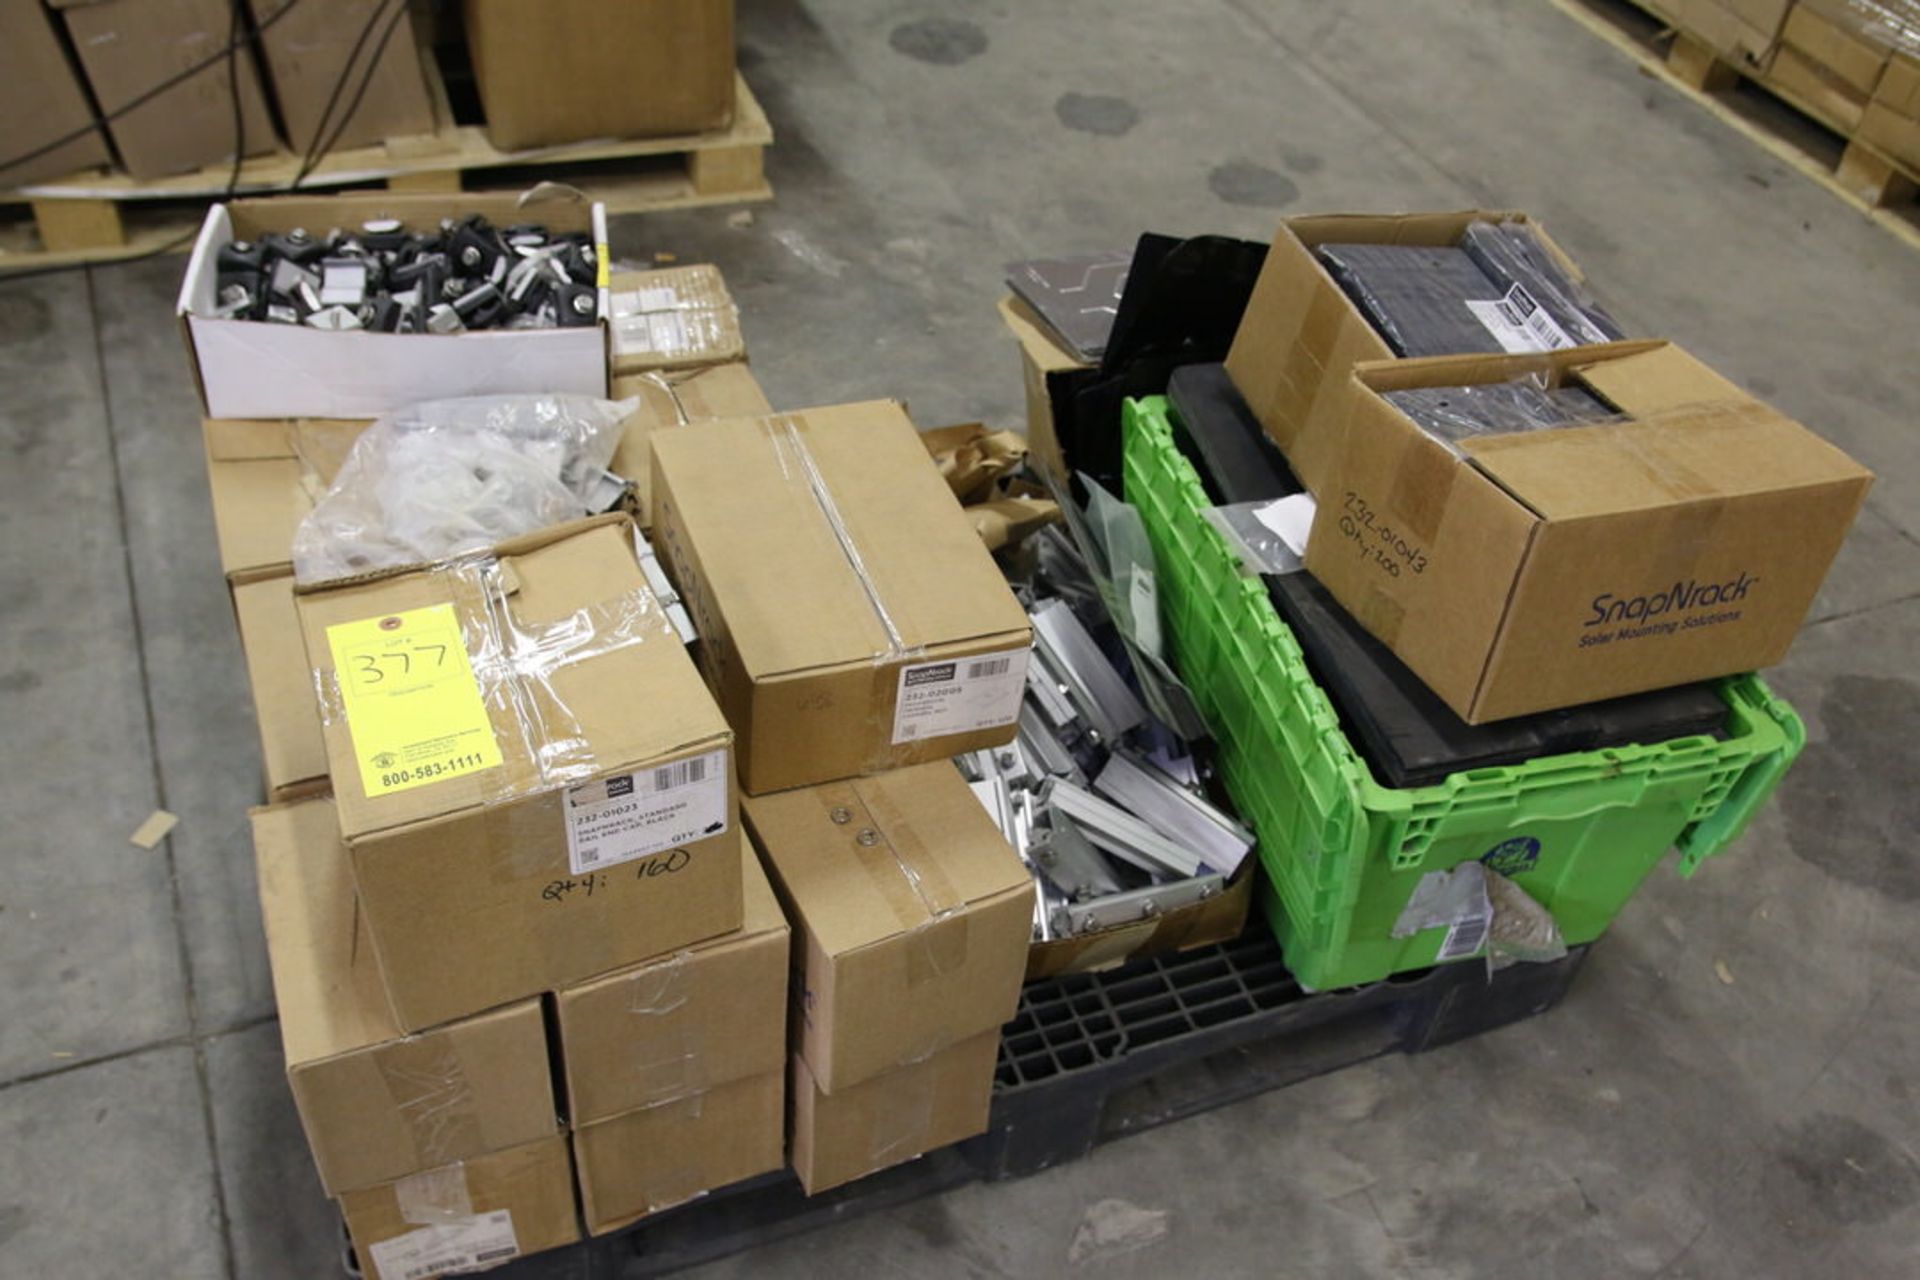 Pallet of SnapNRack Channel Nuts, Rail Splice Assemblies and Aluminum Flashgrip